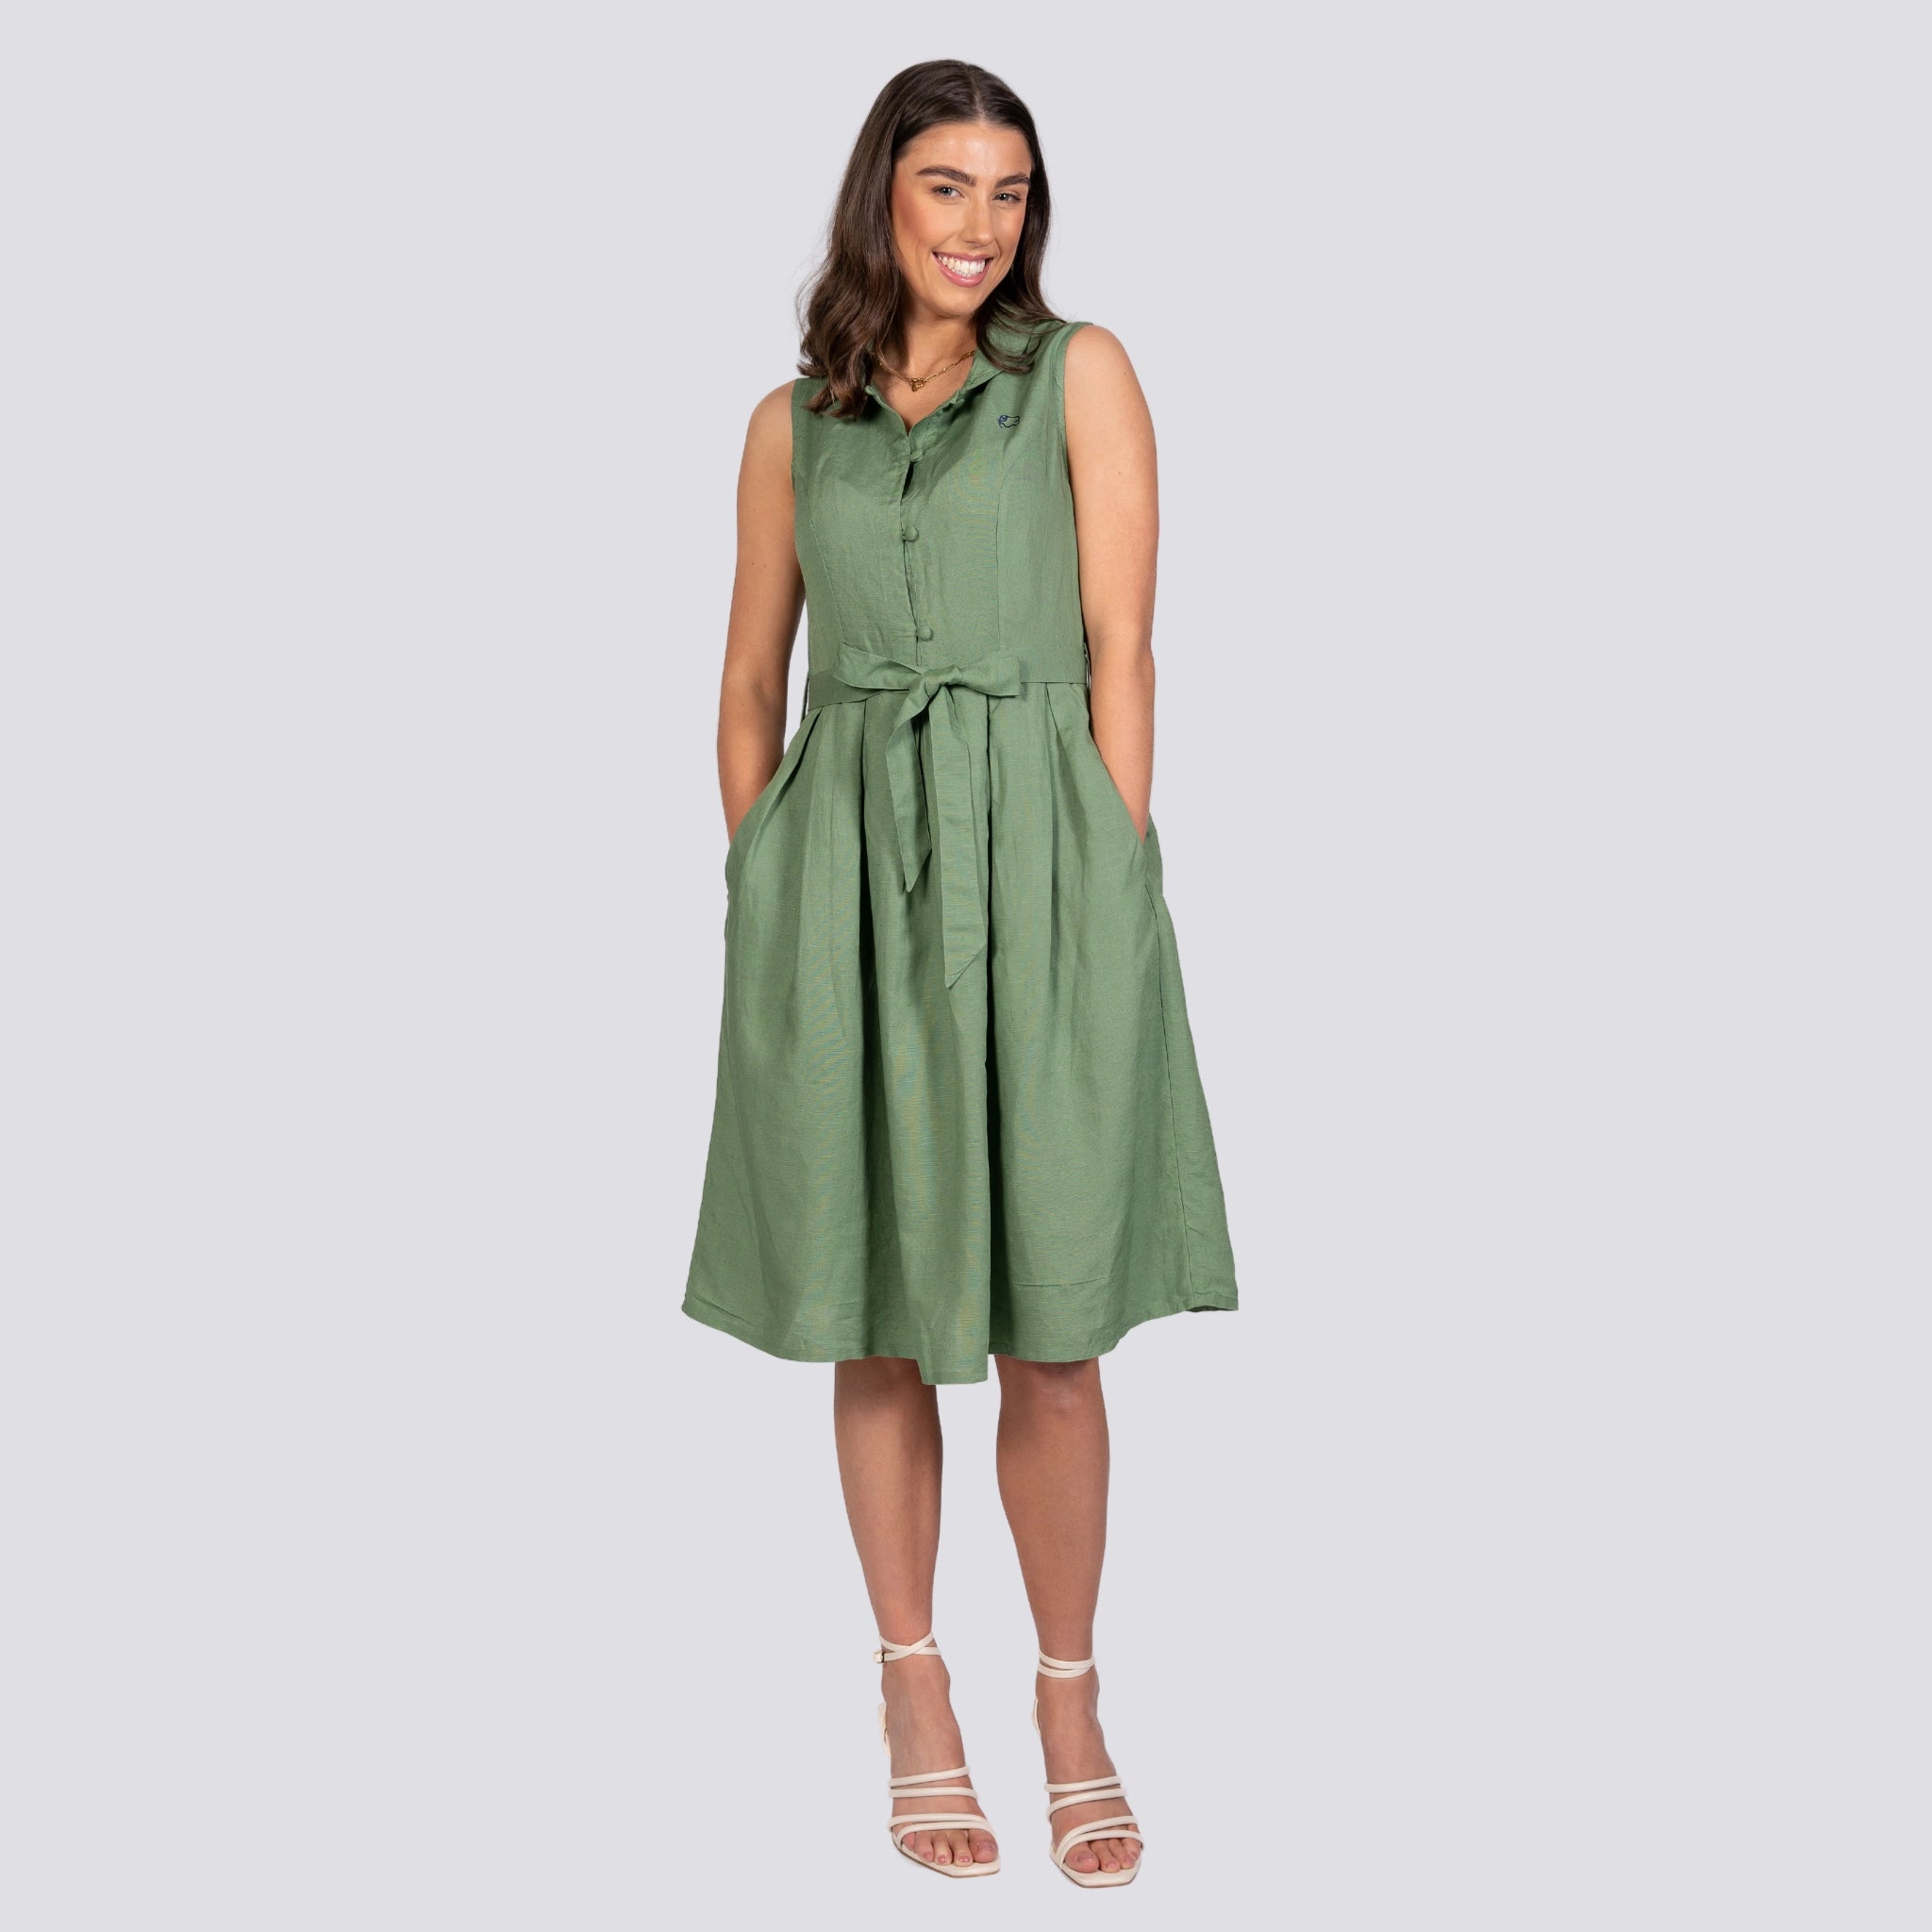 A smiling woman in a Karee green sleeveless Vintage Midi Button-Up Dress with a belted waist, standing against a plain background.